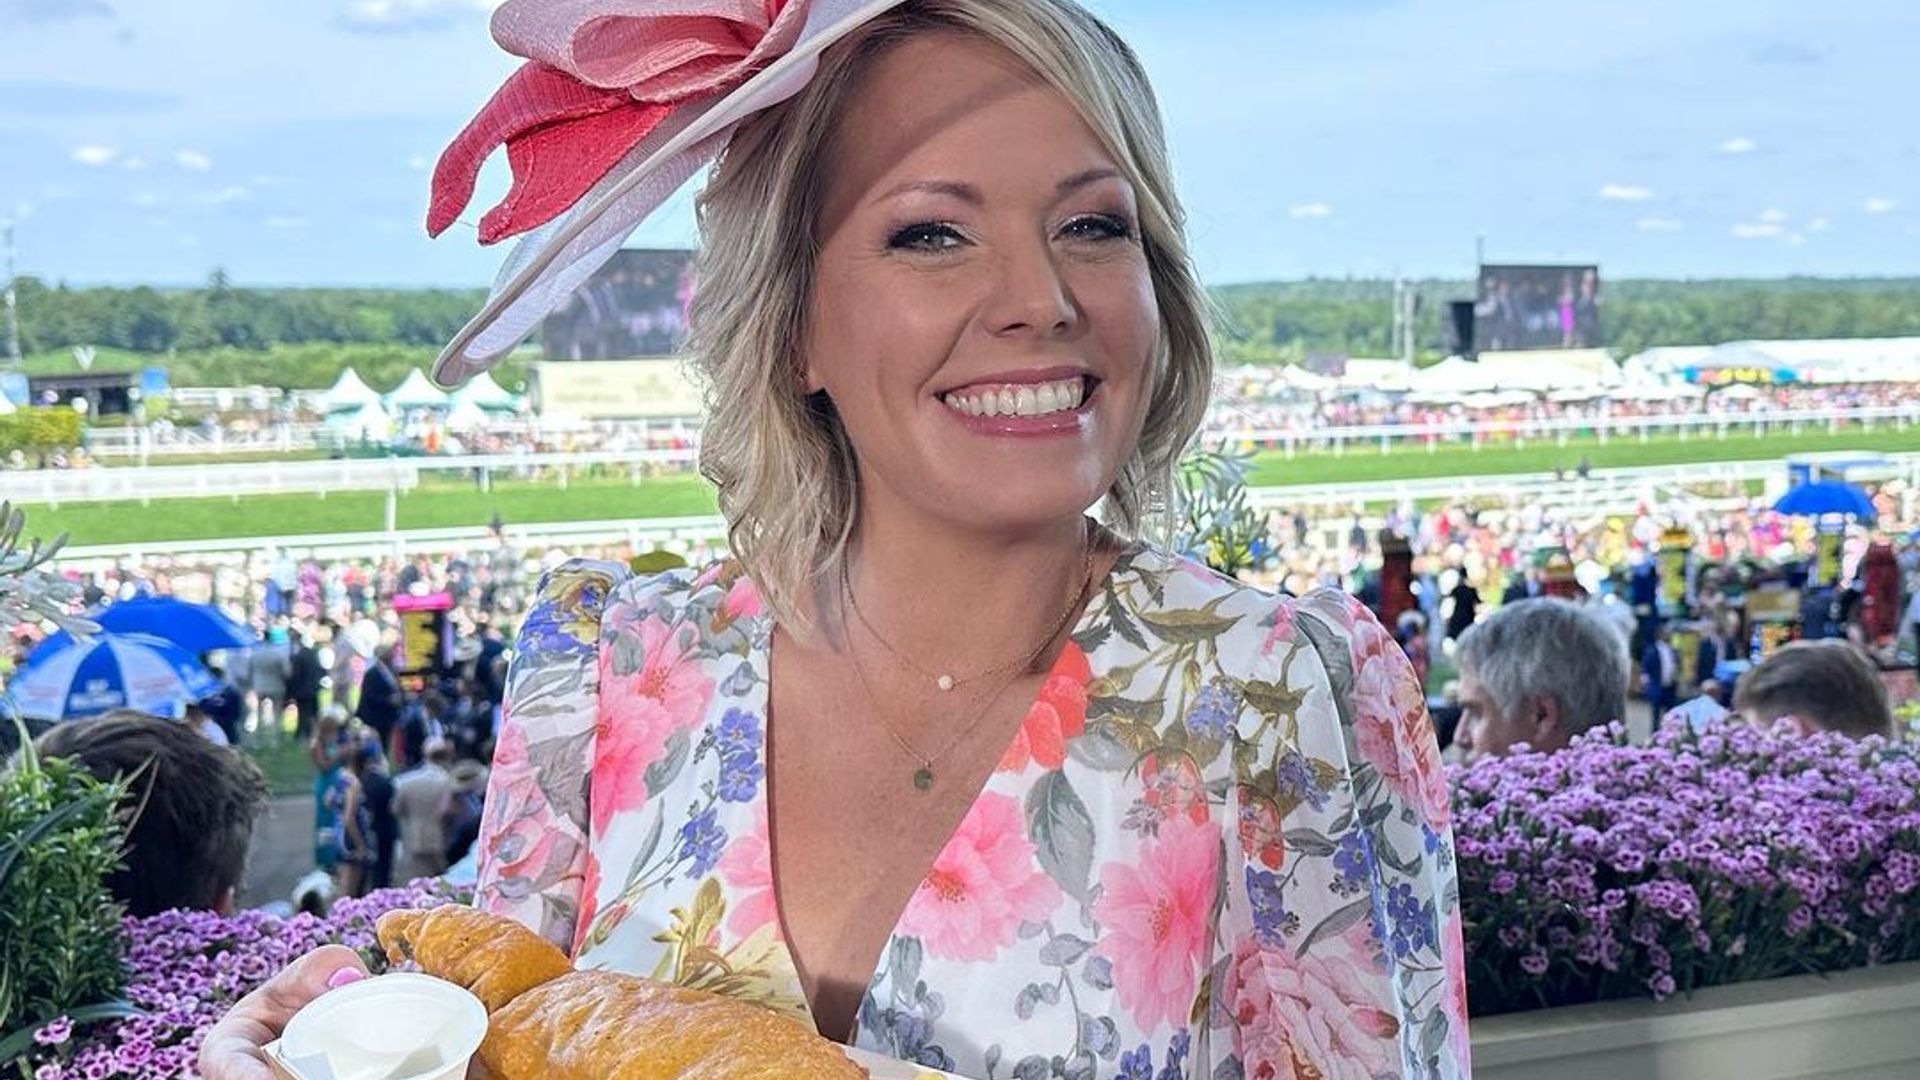 Dylan Dreyer holds plate of fish and chips at Ascot